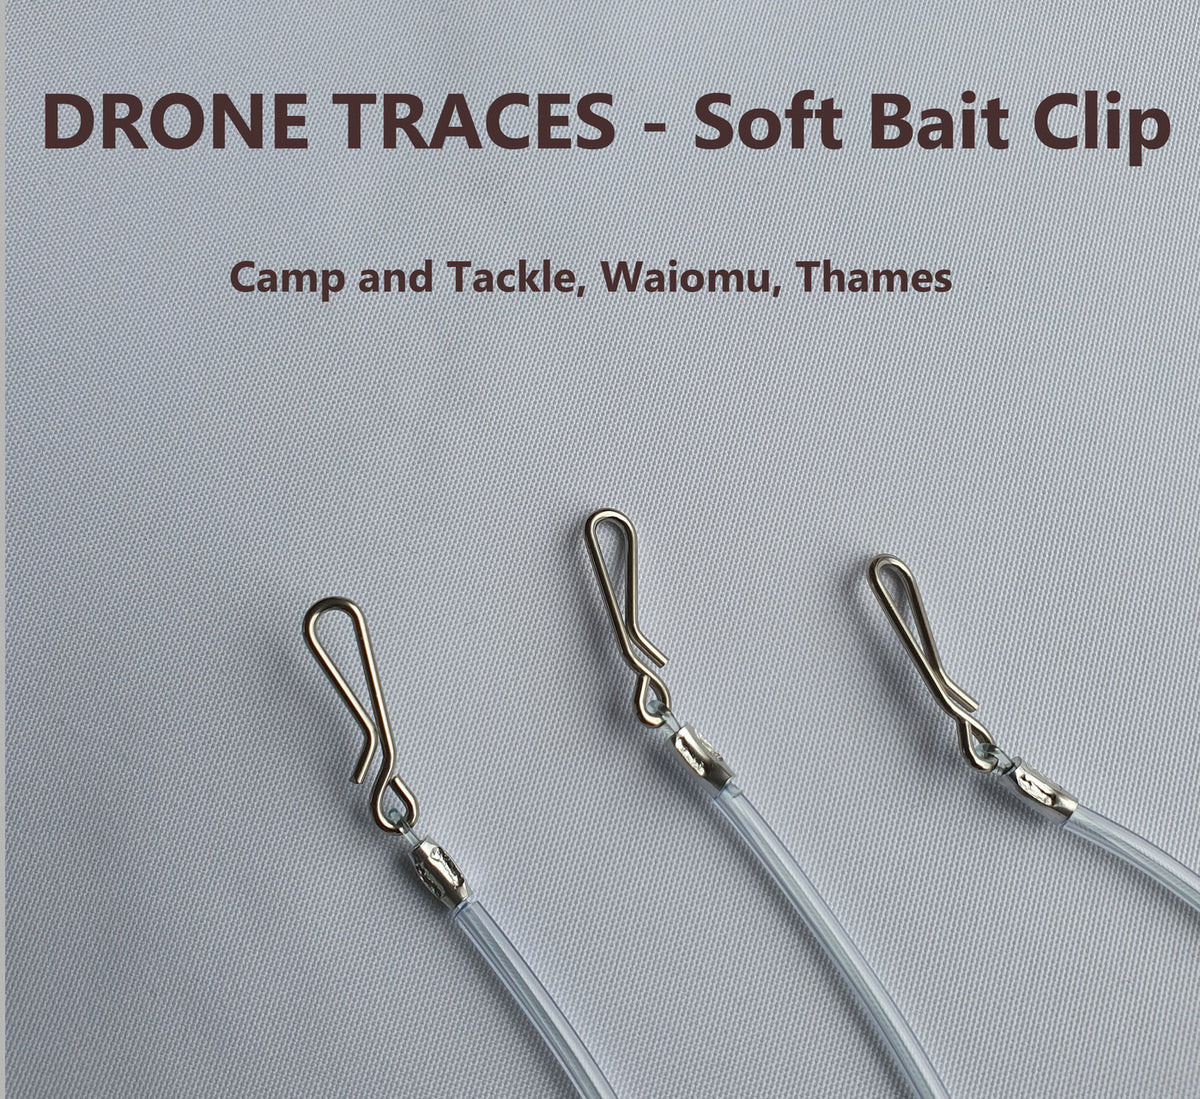 Drone Traces - Tubed - NZ MADE – Camp and Tackle